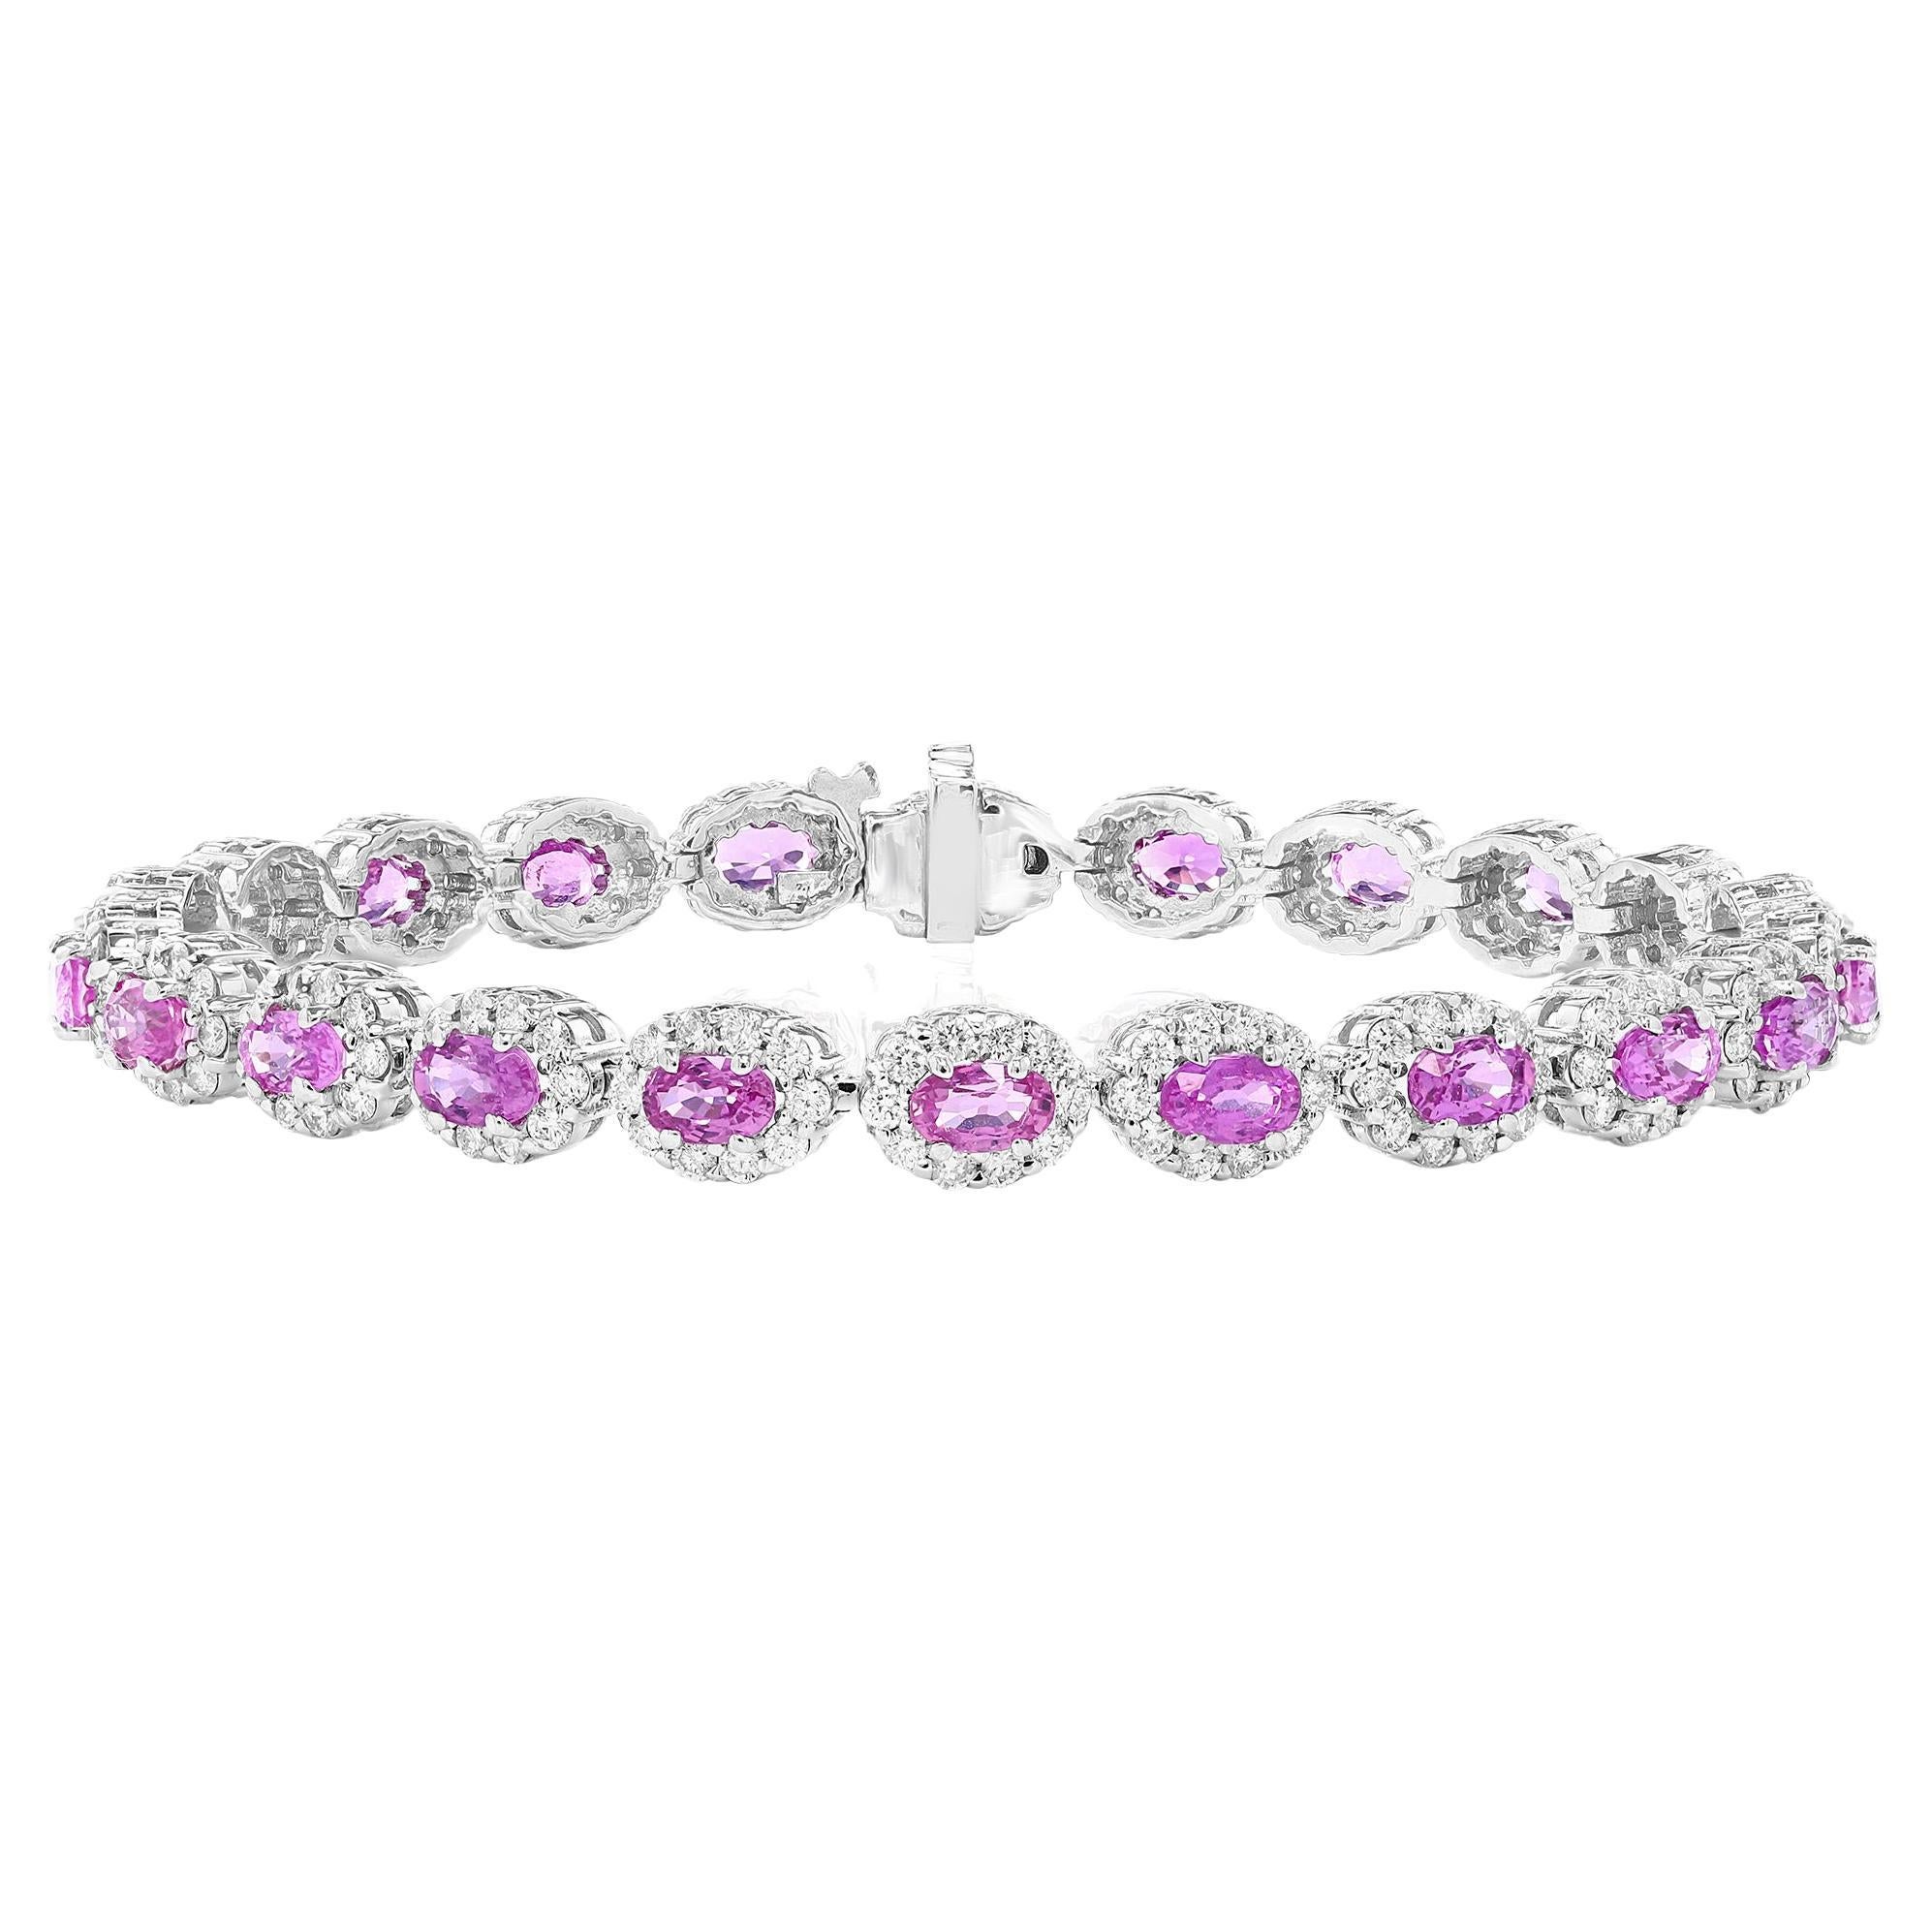 7.21 Carat Oval Cut Pink Sapphire and Diamond Halo Bracelet in 14K White Gold For Sale